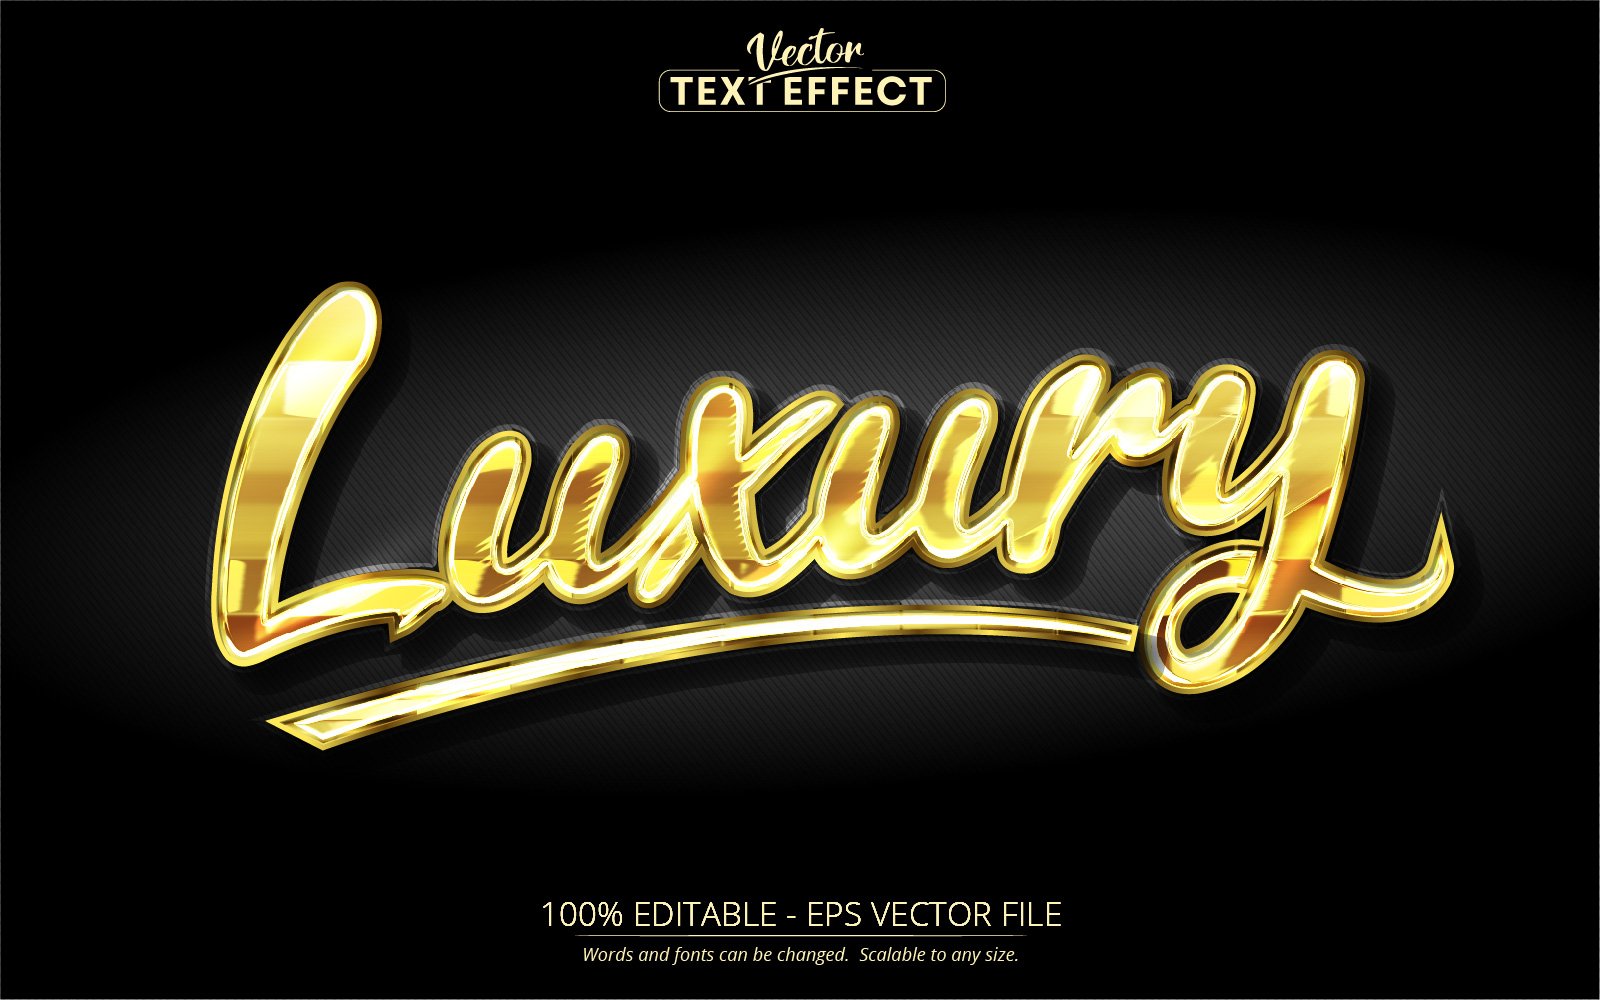 Luxury - Editable Text Effect, Gold And Shiny Text Style, Graphics Illustration